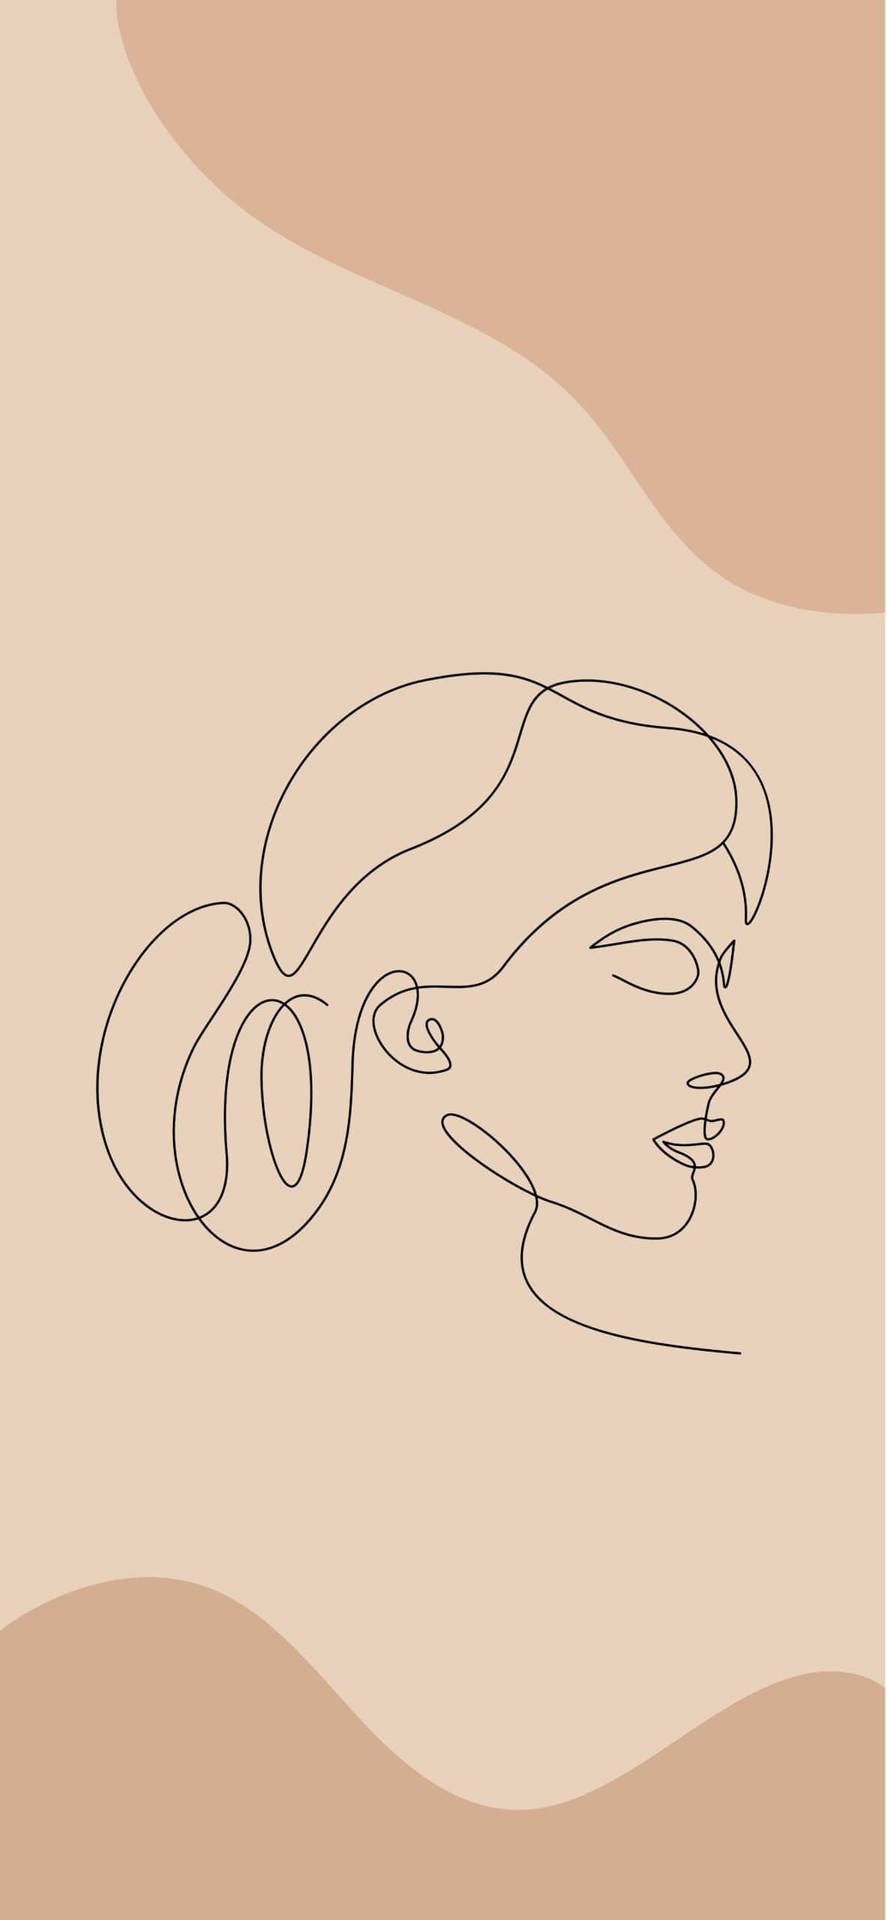 One Line Drawing Woman With Ponytail Wallpaper